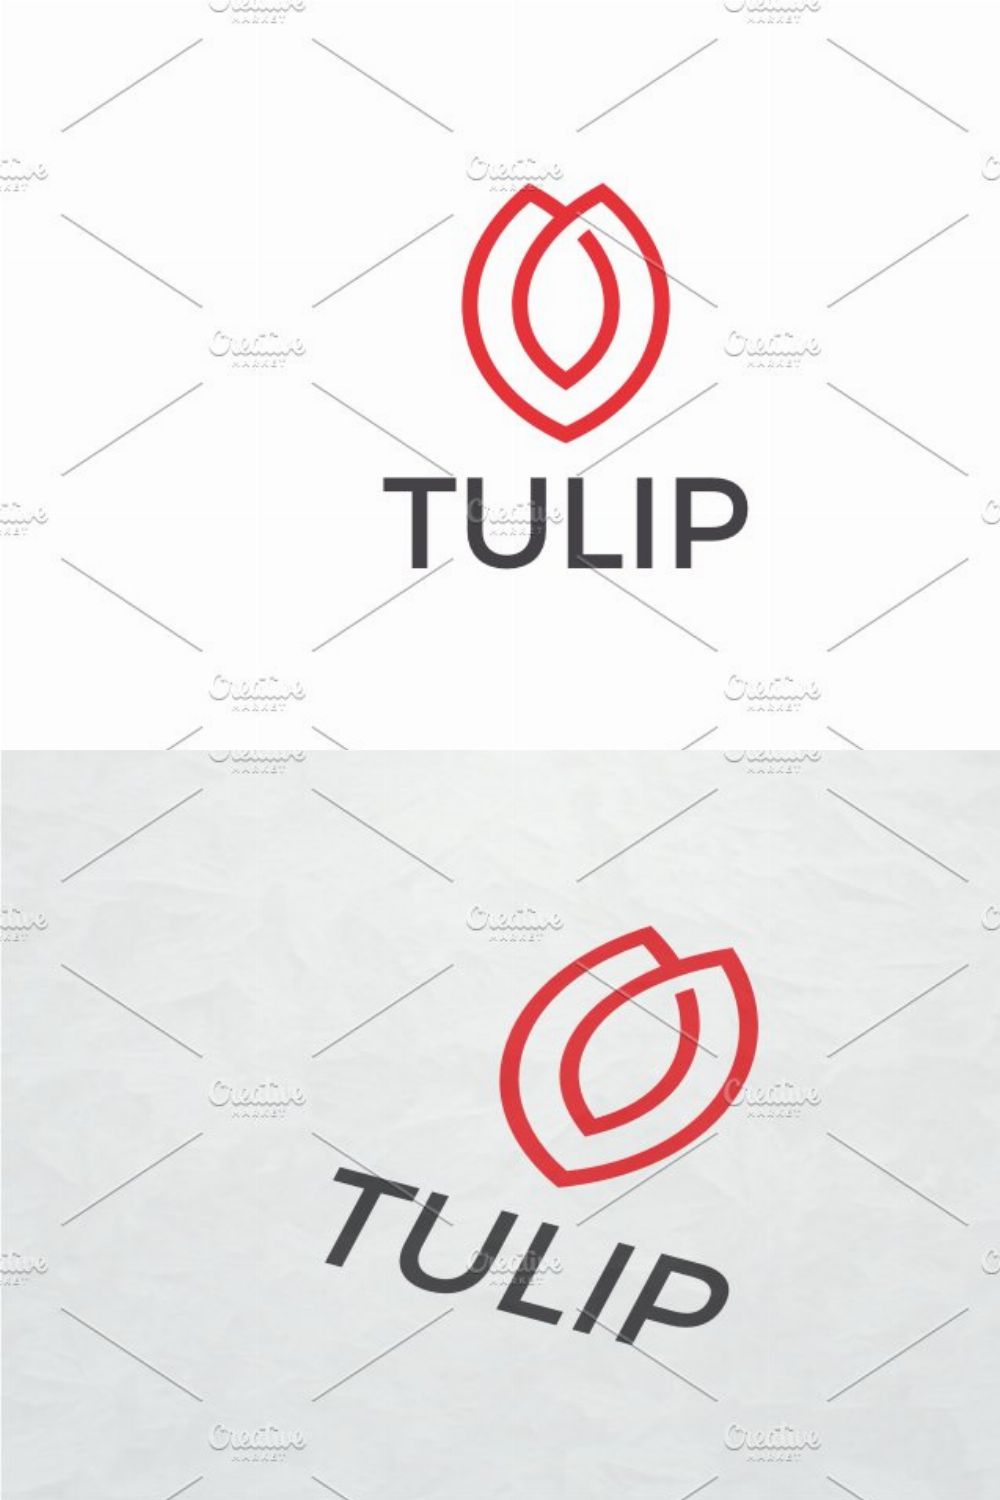 Tulip pinterest preview image.